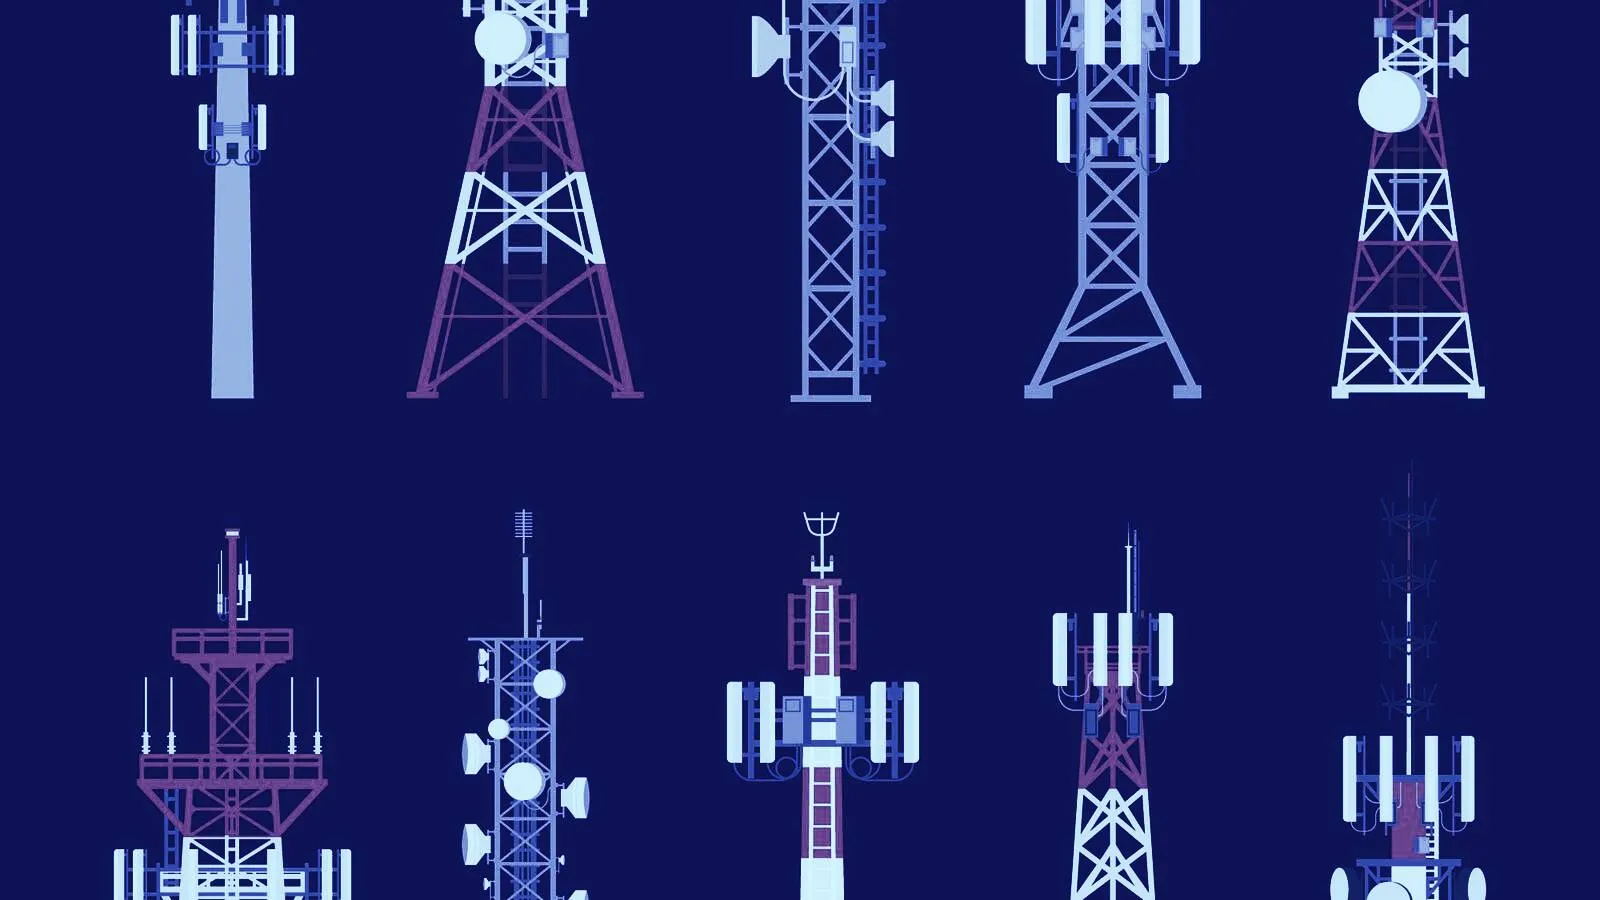 Cell towers burned in the UK due to 5G theory. Image: Shutterstock